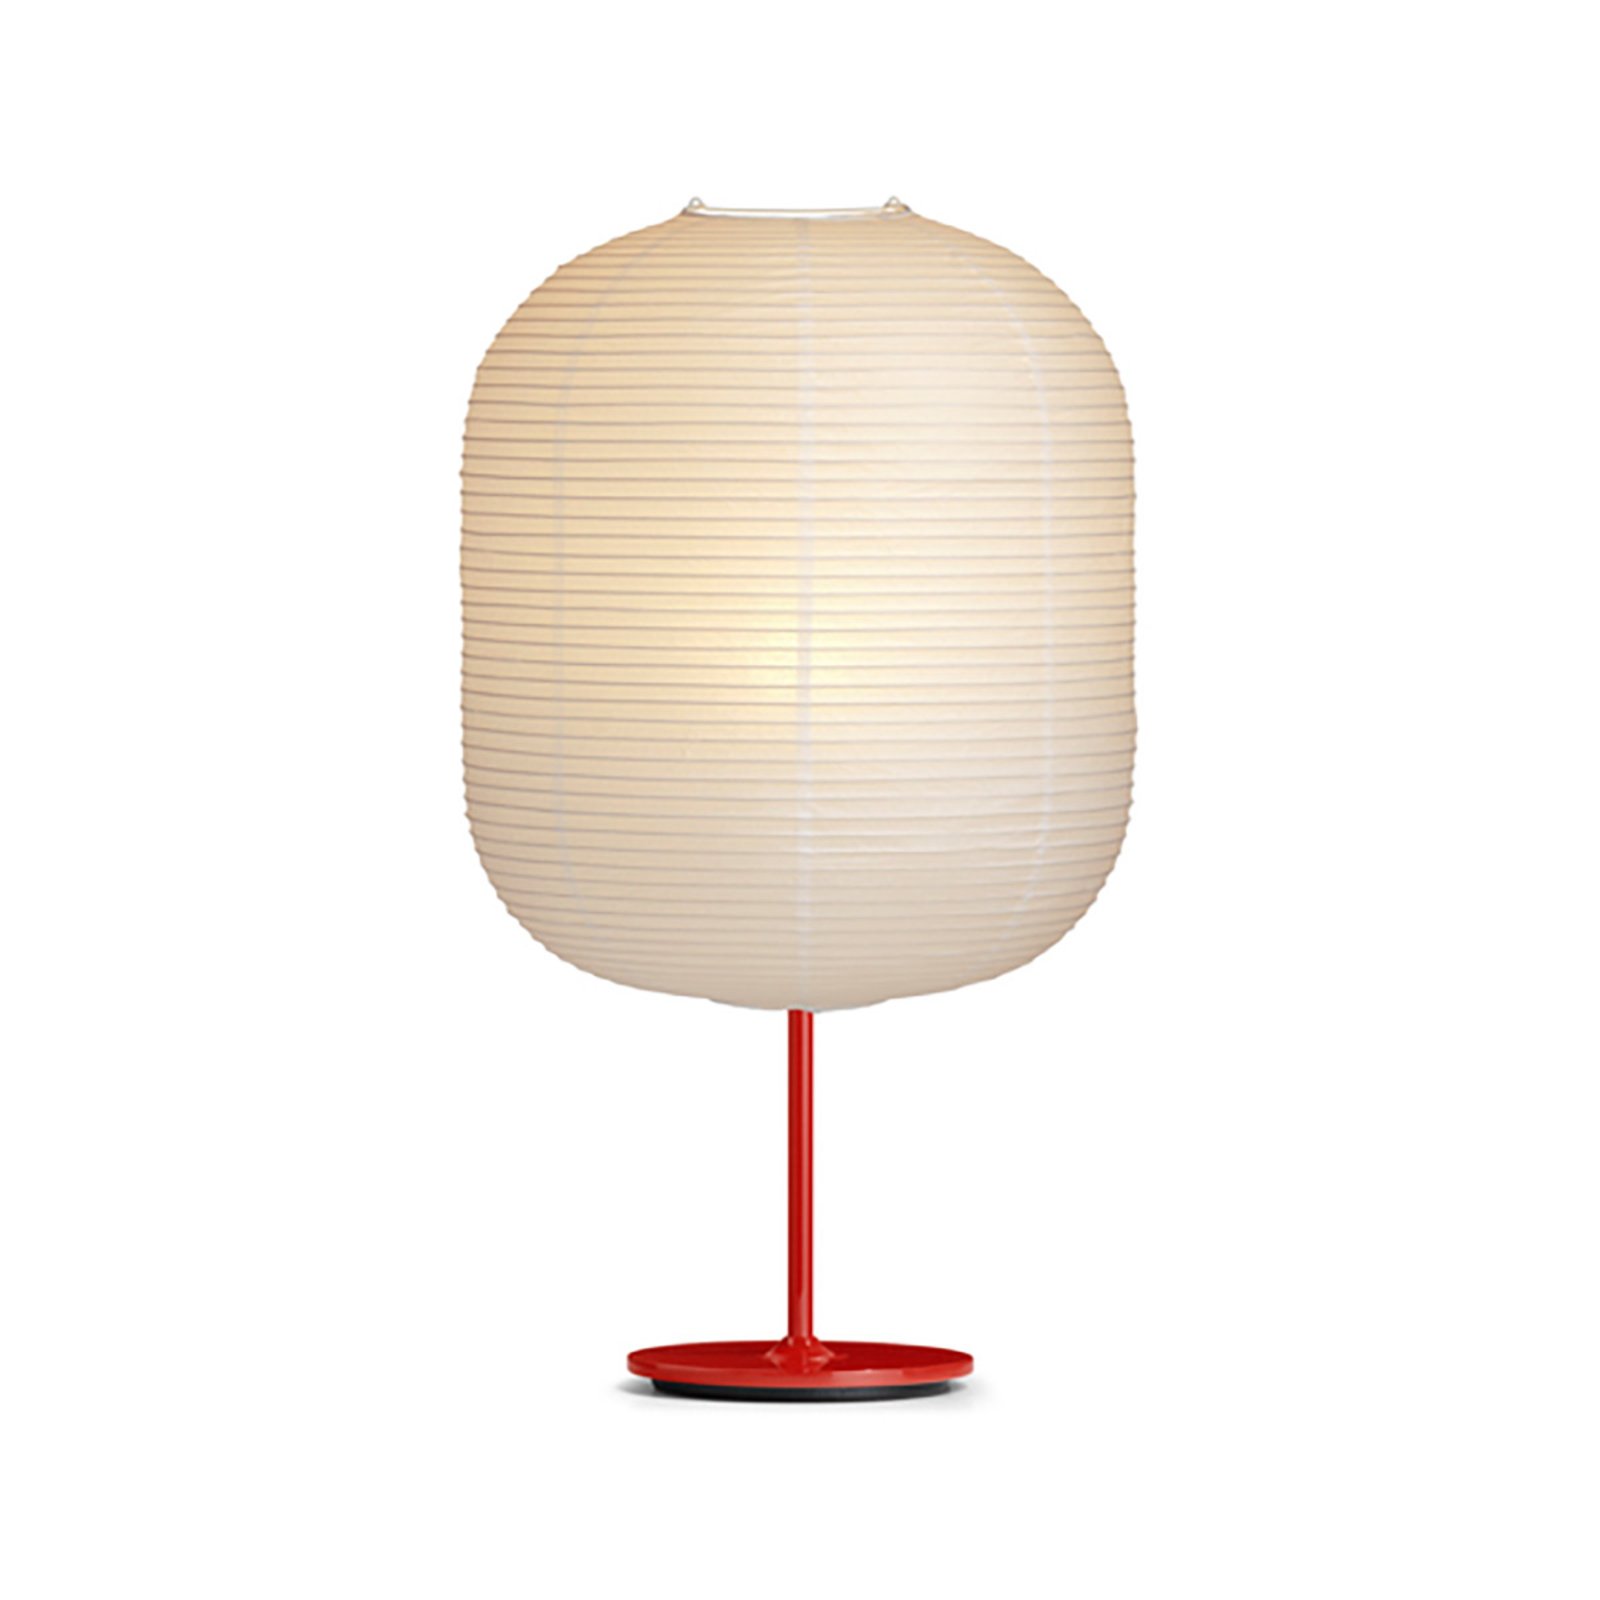 HAY Common Table, Oblong lampshade signal red base